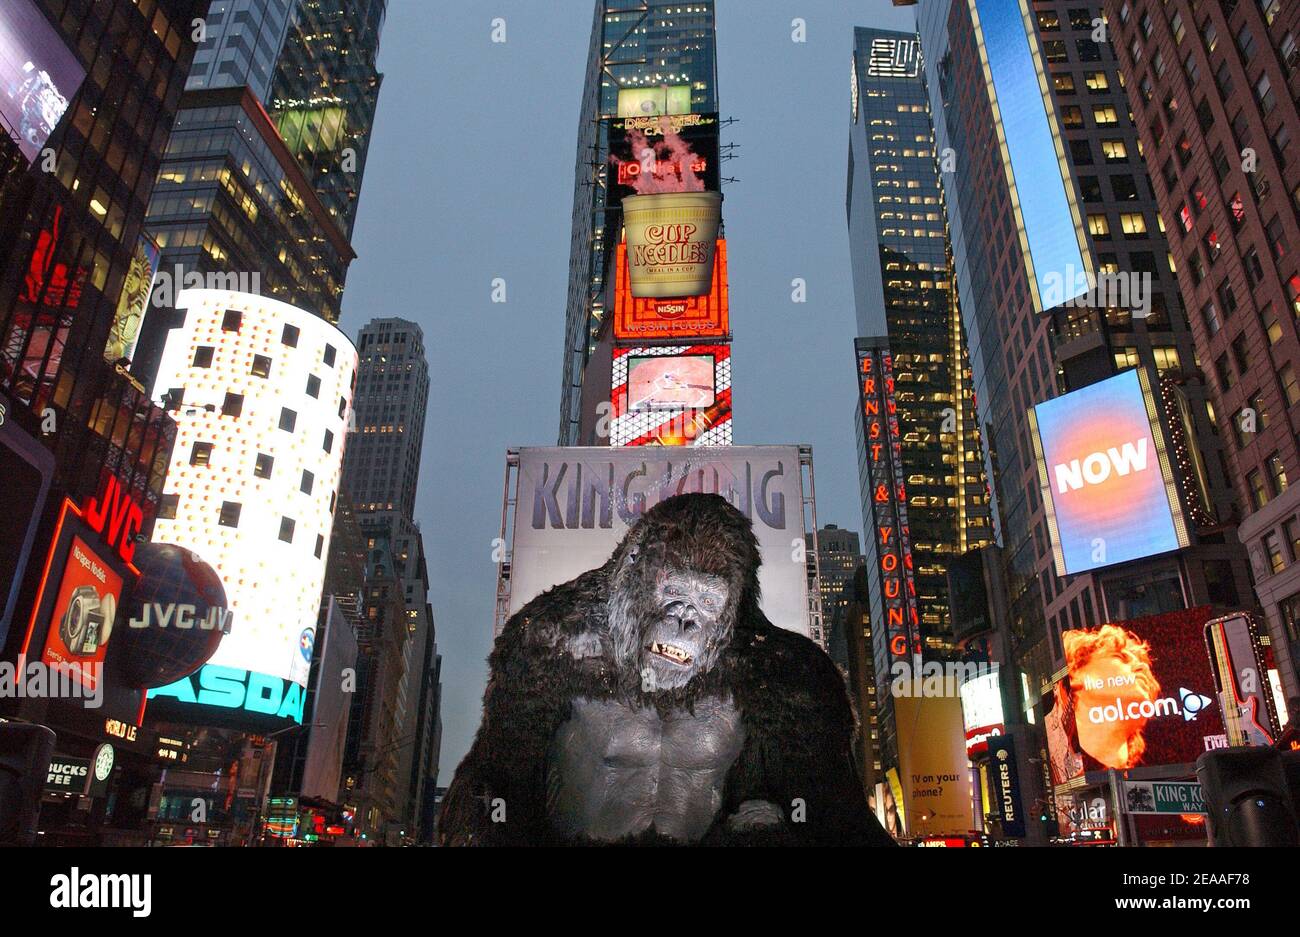 vredig Blokkeren koffer A 20 feet (7 meters) tall statue of King Kong towers in the middle of Times  Square to promote the world premiere of the new movie 'King Kong', in New  York, on